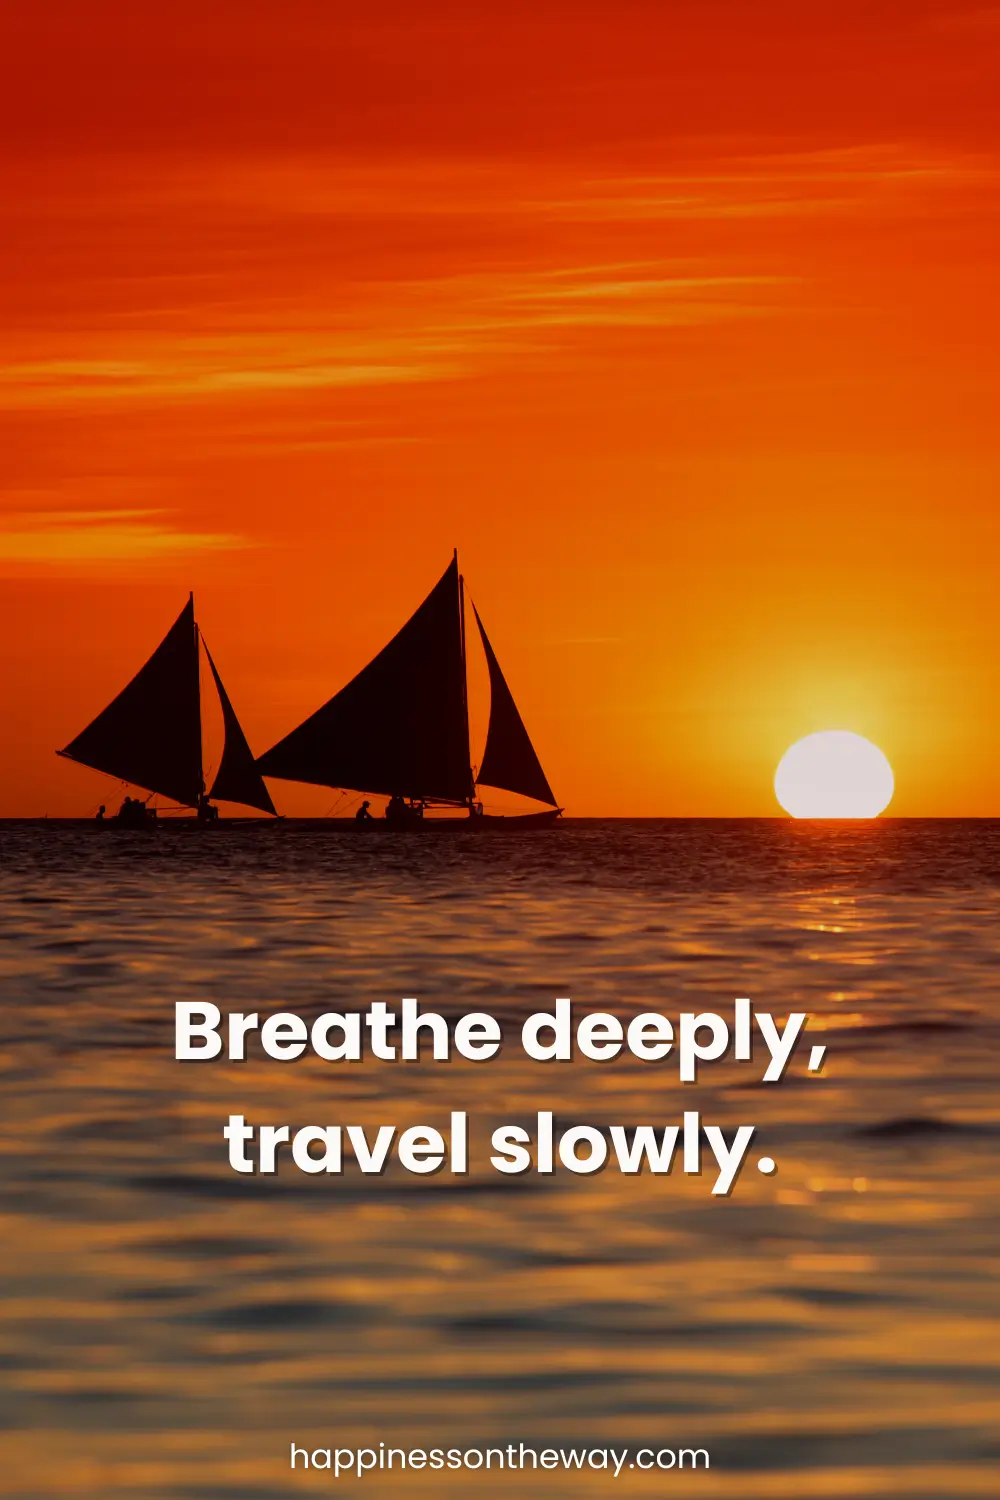 Paraw sailboats during sunset on the calm waters of Boracay with slow travel quote: Breathe deeply, travel slowly.